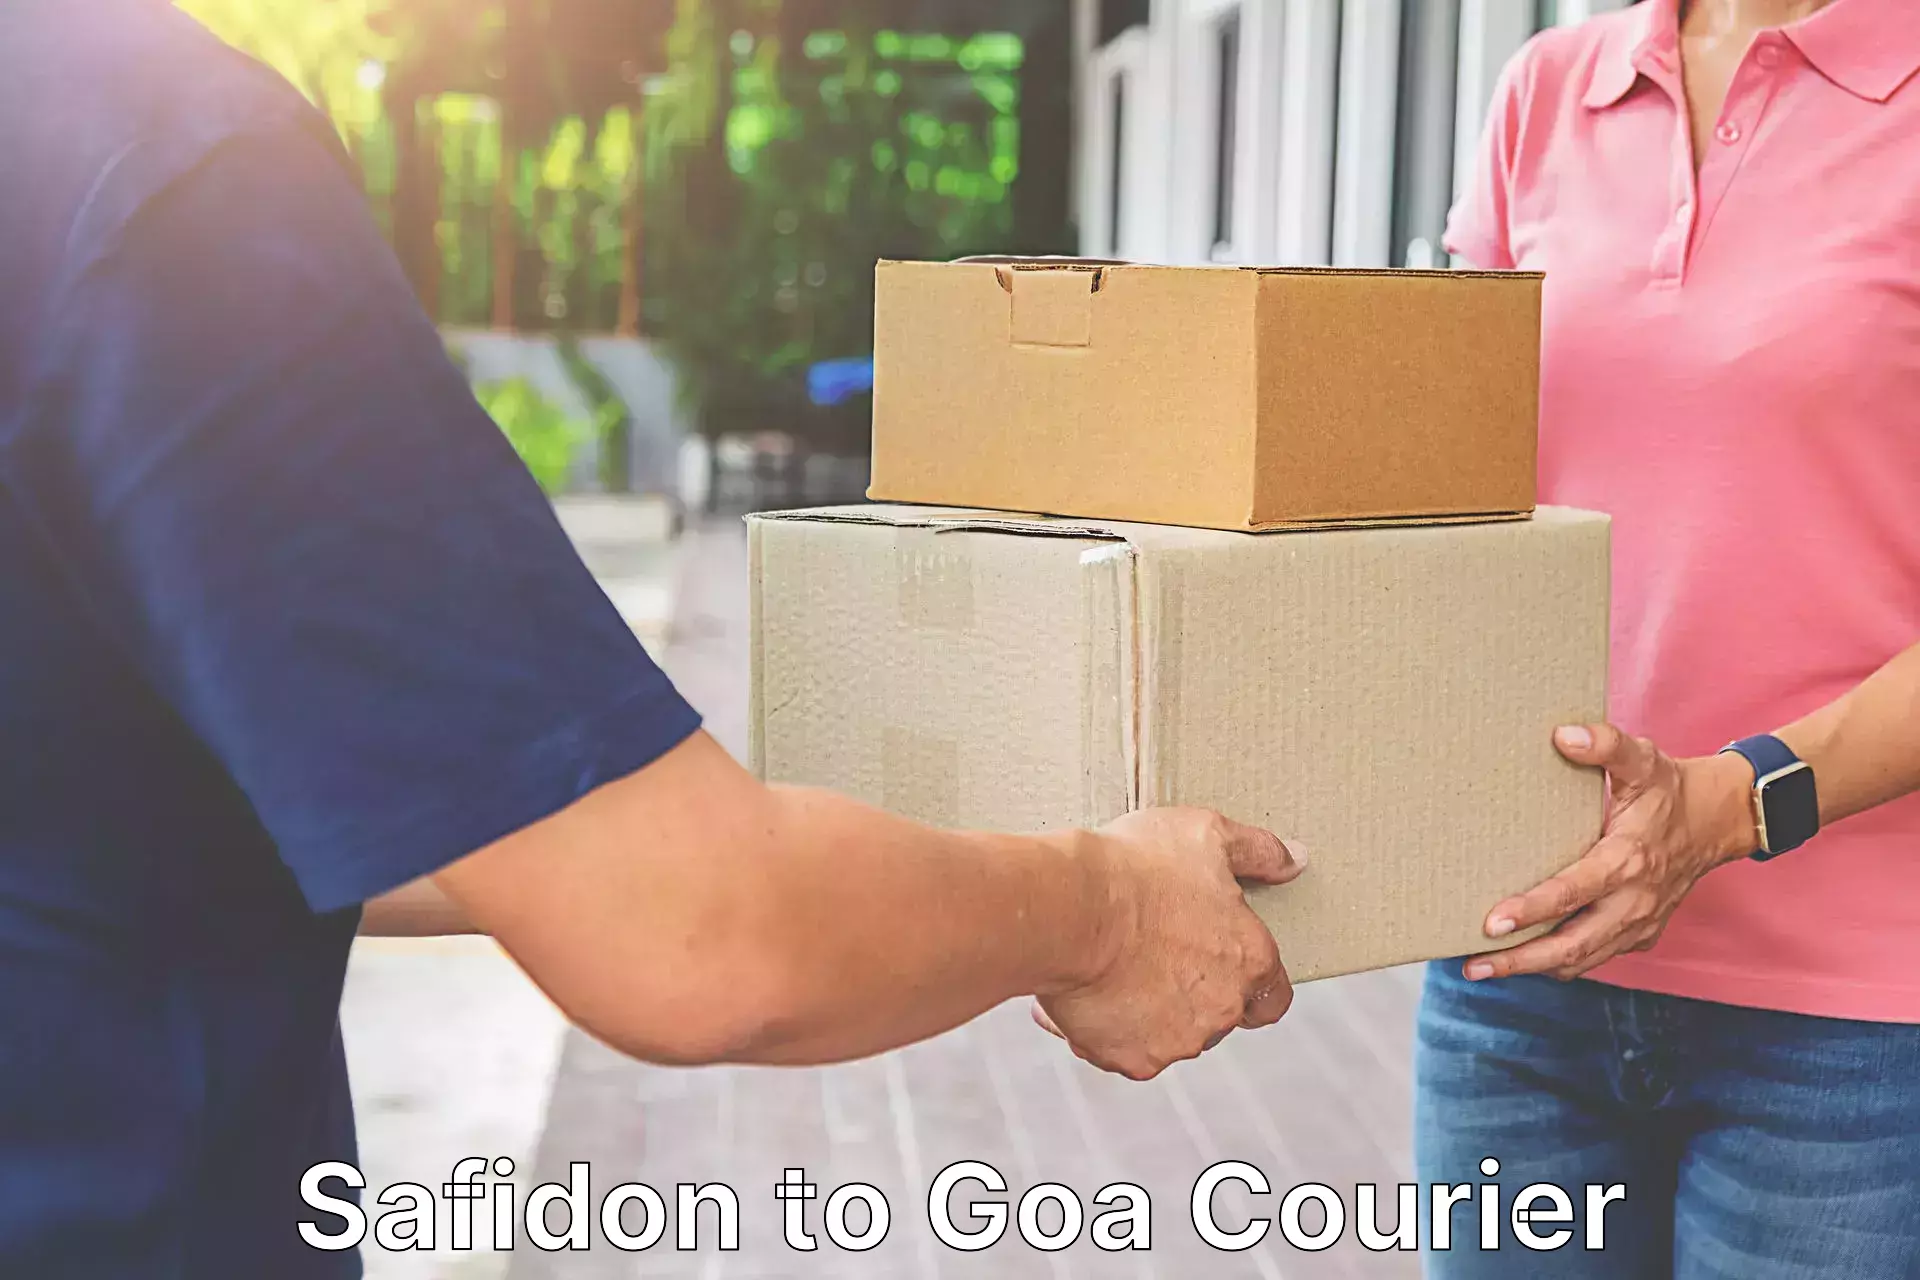 State-of-the-art courier technology Safidon to Goa